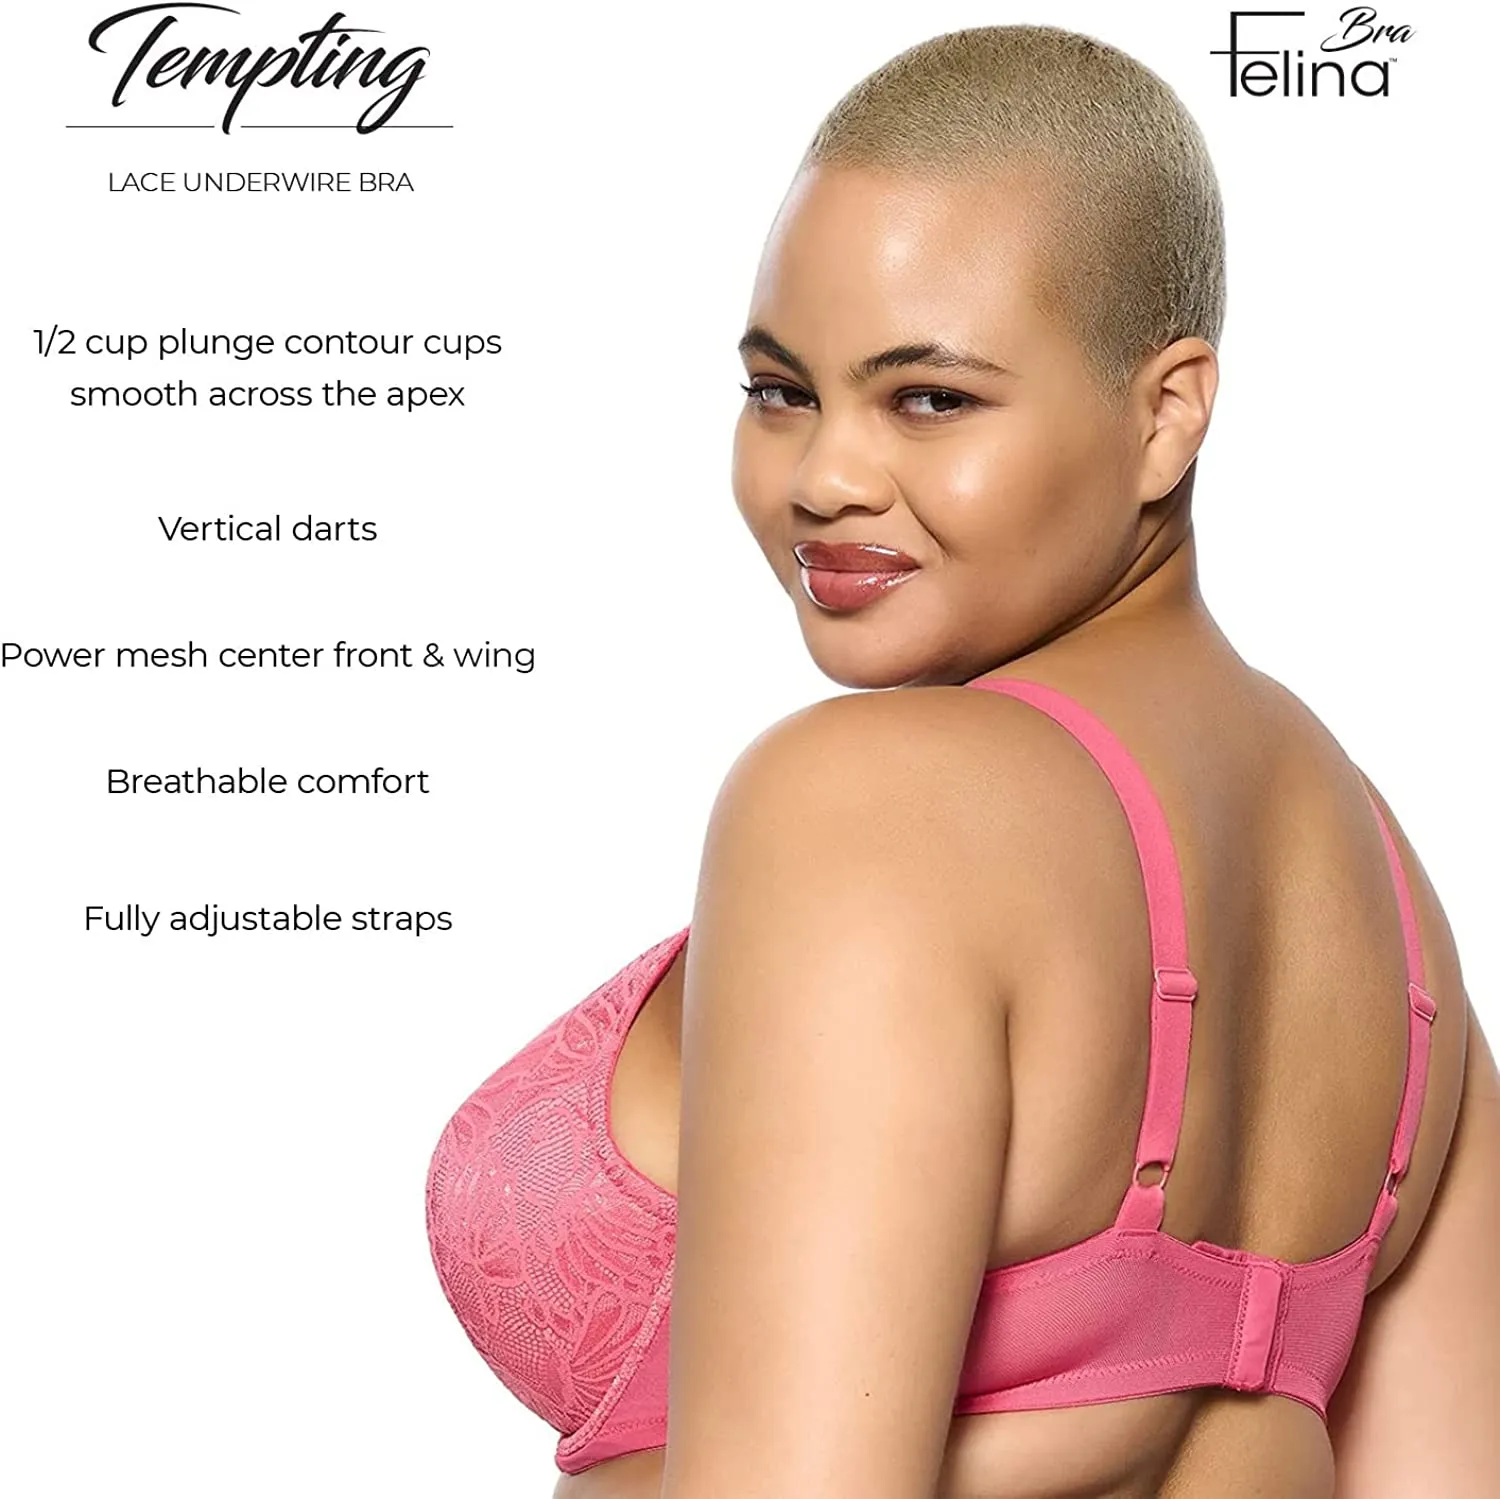 Felina Paramour Tempting Lace Underwire Bra Womens Plus Size Lace Bra From  Jtmf, $70.97